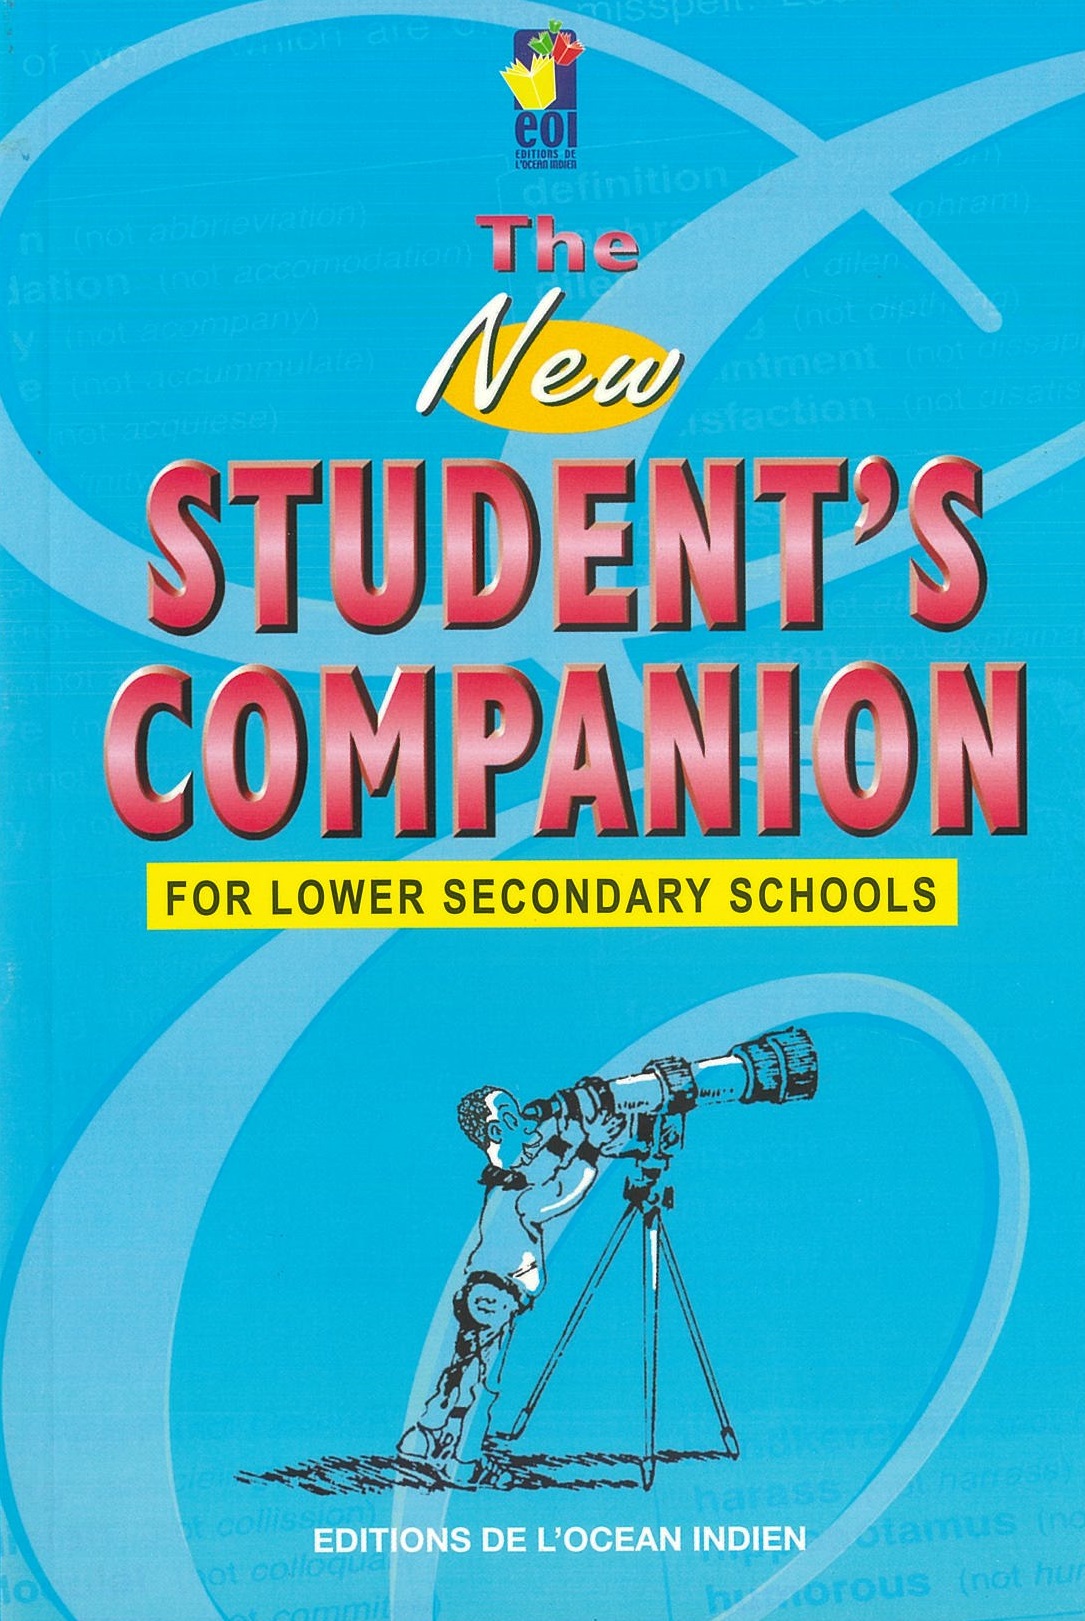 THE NEW STUDENTS FOR LOWER SECONDARY SCHOOLS